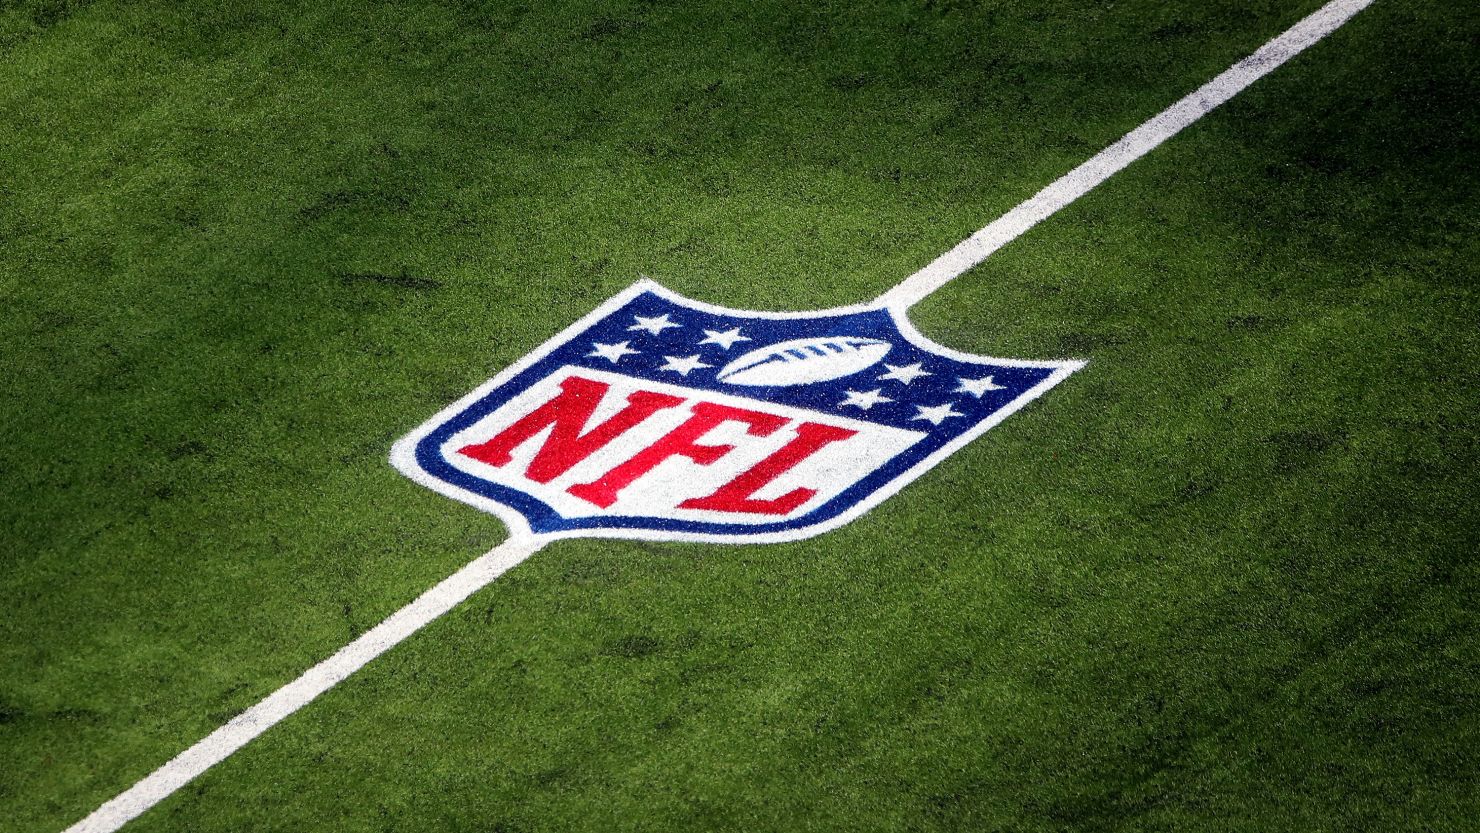 A general view of the NFL logo on the field is seen before the game between the Arizona Cardinals and the Los Angeles Rams at SoFi Stadium on October 03, 2021 in Inglewood, California.